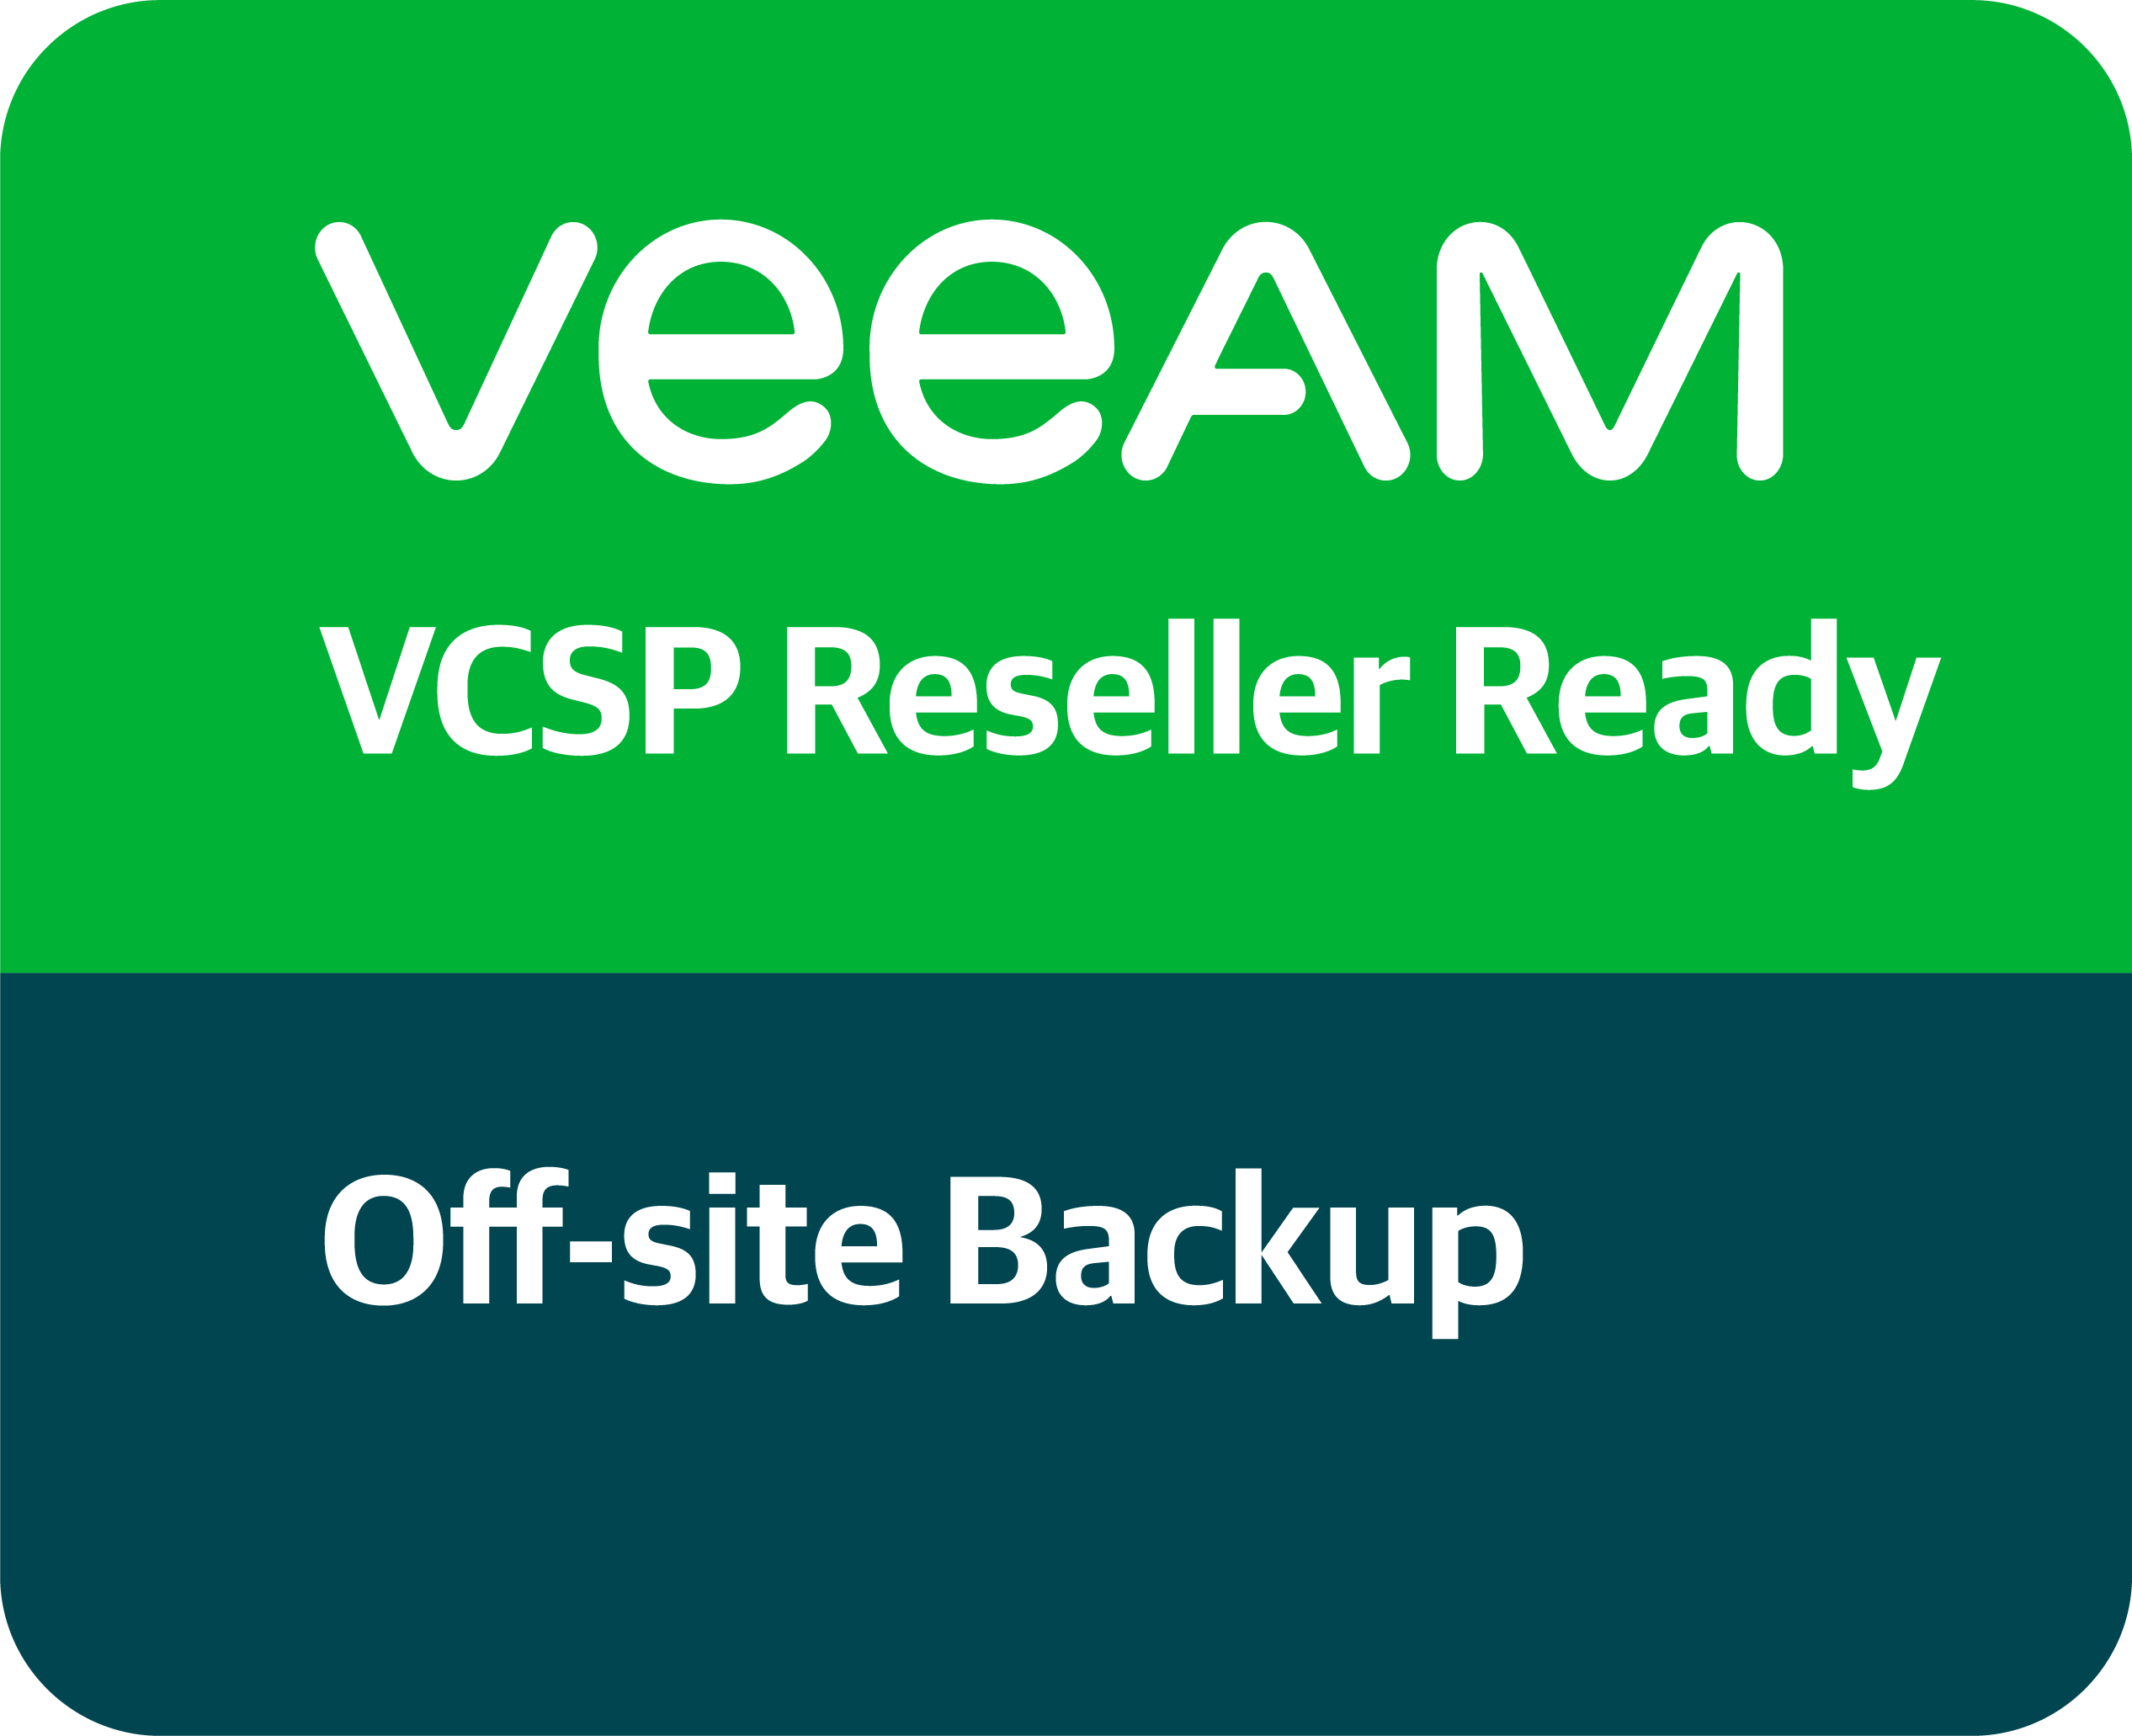 VCSP_Reseller_Ready_Off-site_Backup)